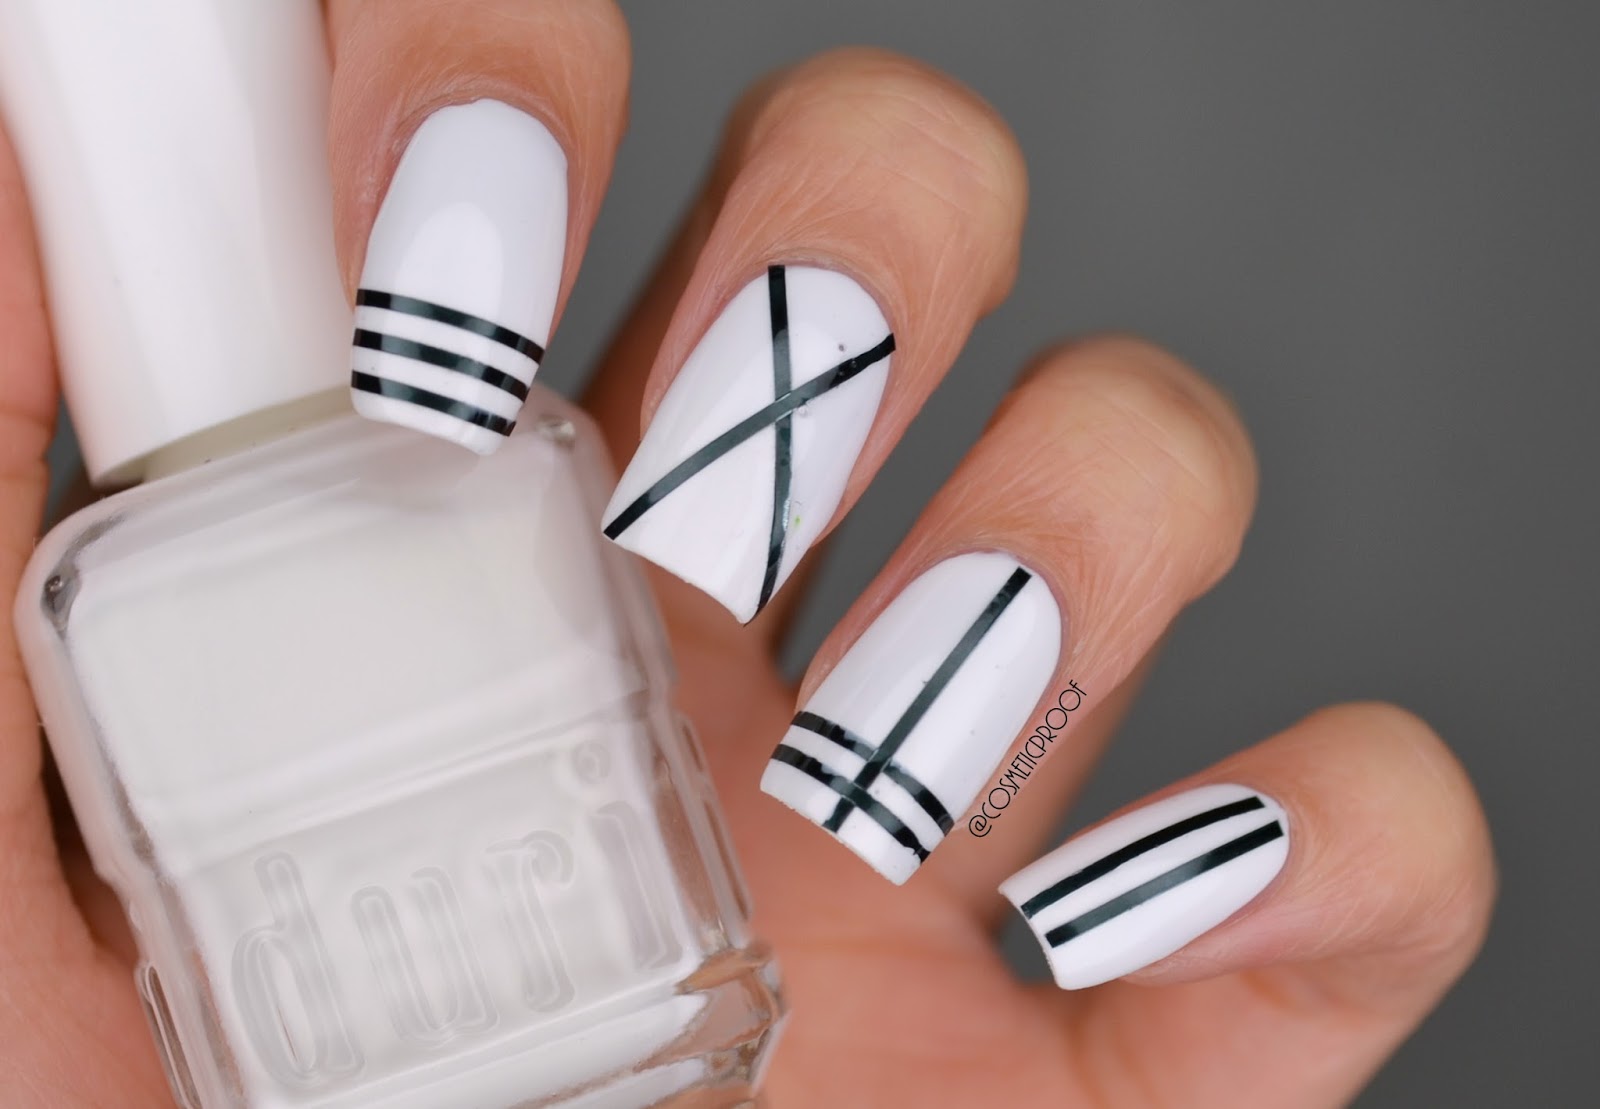 1. Black and White Nail Art Designs - wide 8